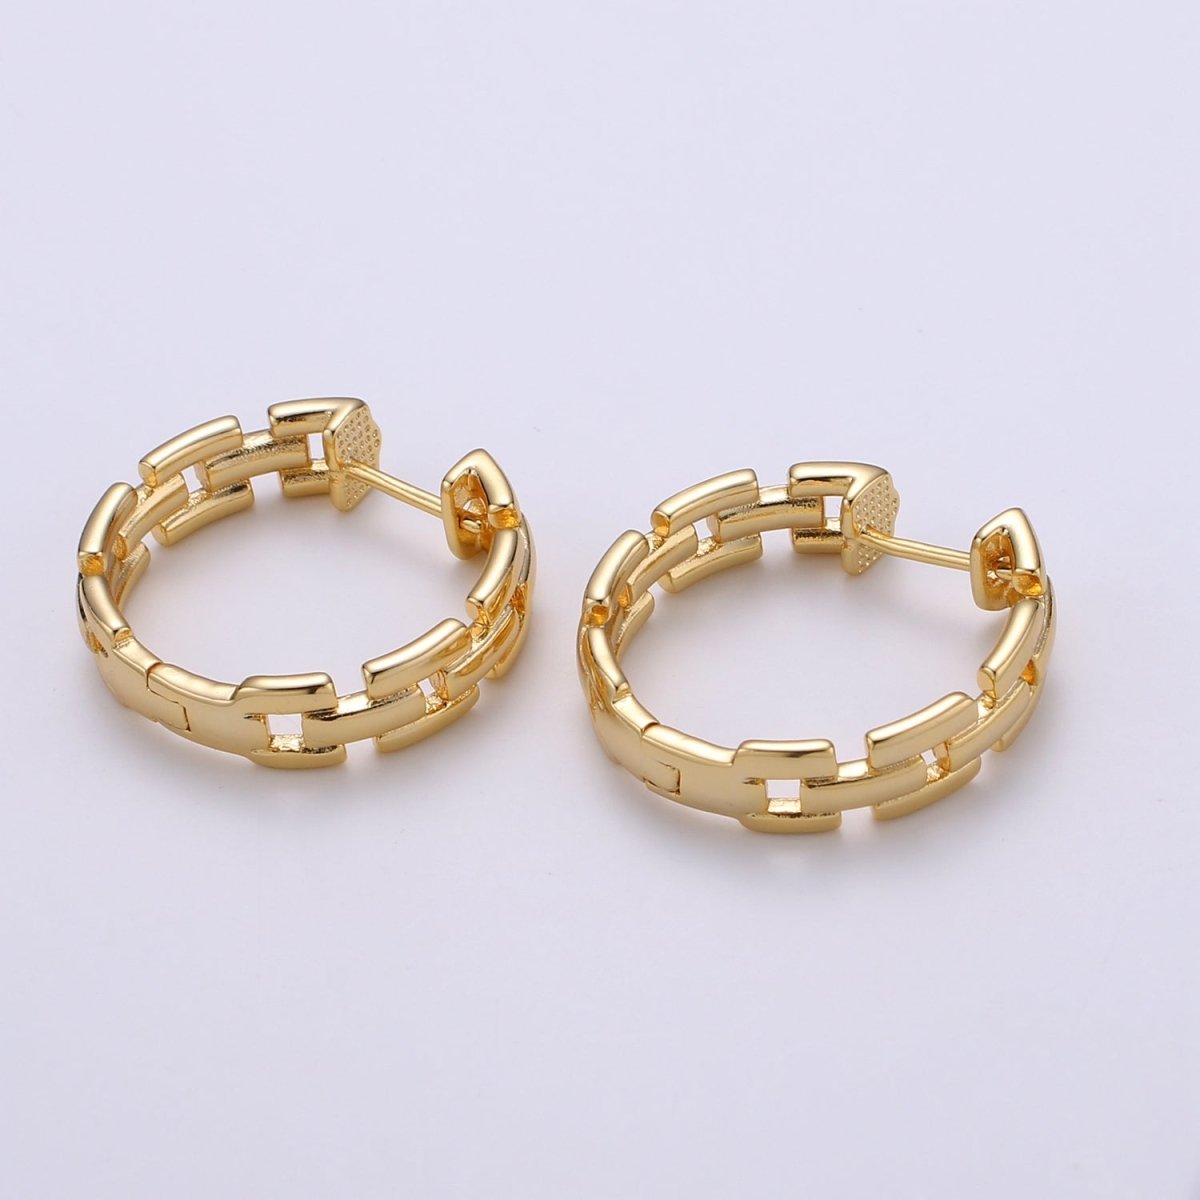 25mm Large Gold Link Hoops, 24k Gold Filled Hoop Earrings, Chunky Hoop Earrings, Big Hoop Earrings, Bold Chain Hoops for everyday wear Q-351 - DLUXCA